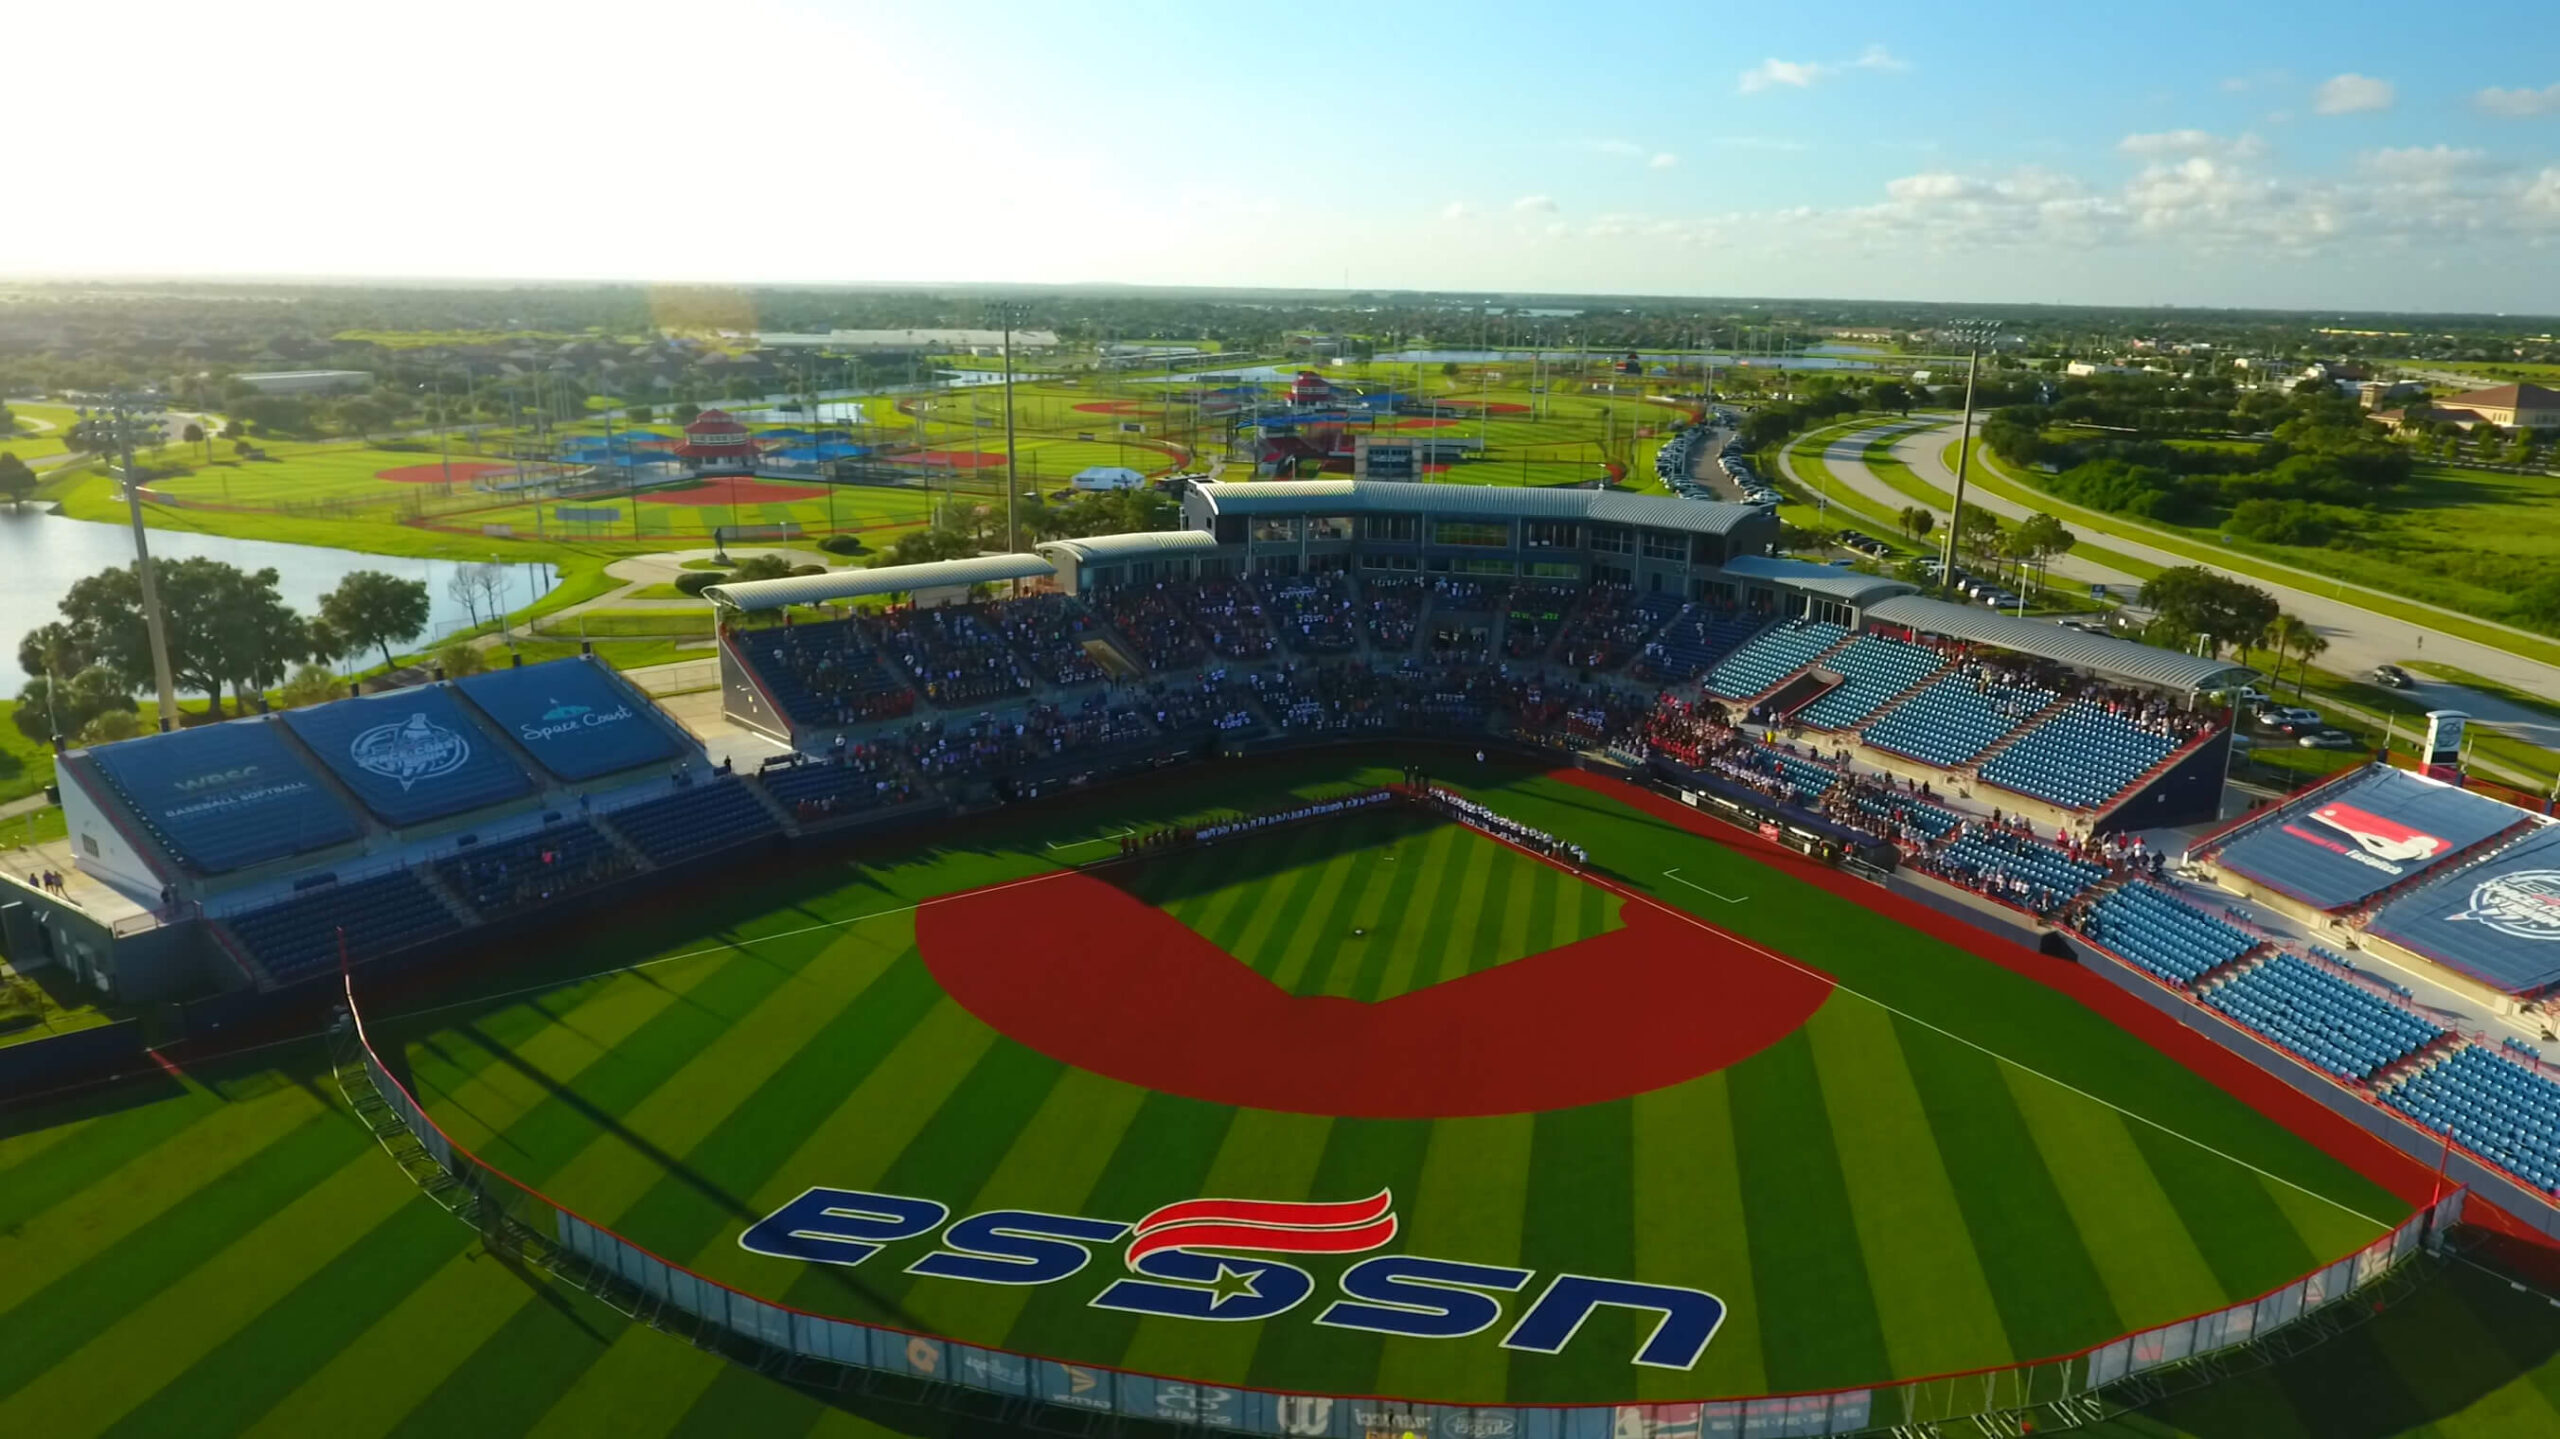 USSSA Stadium from the air